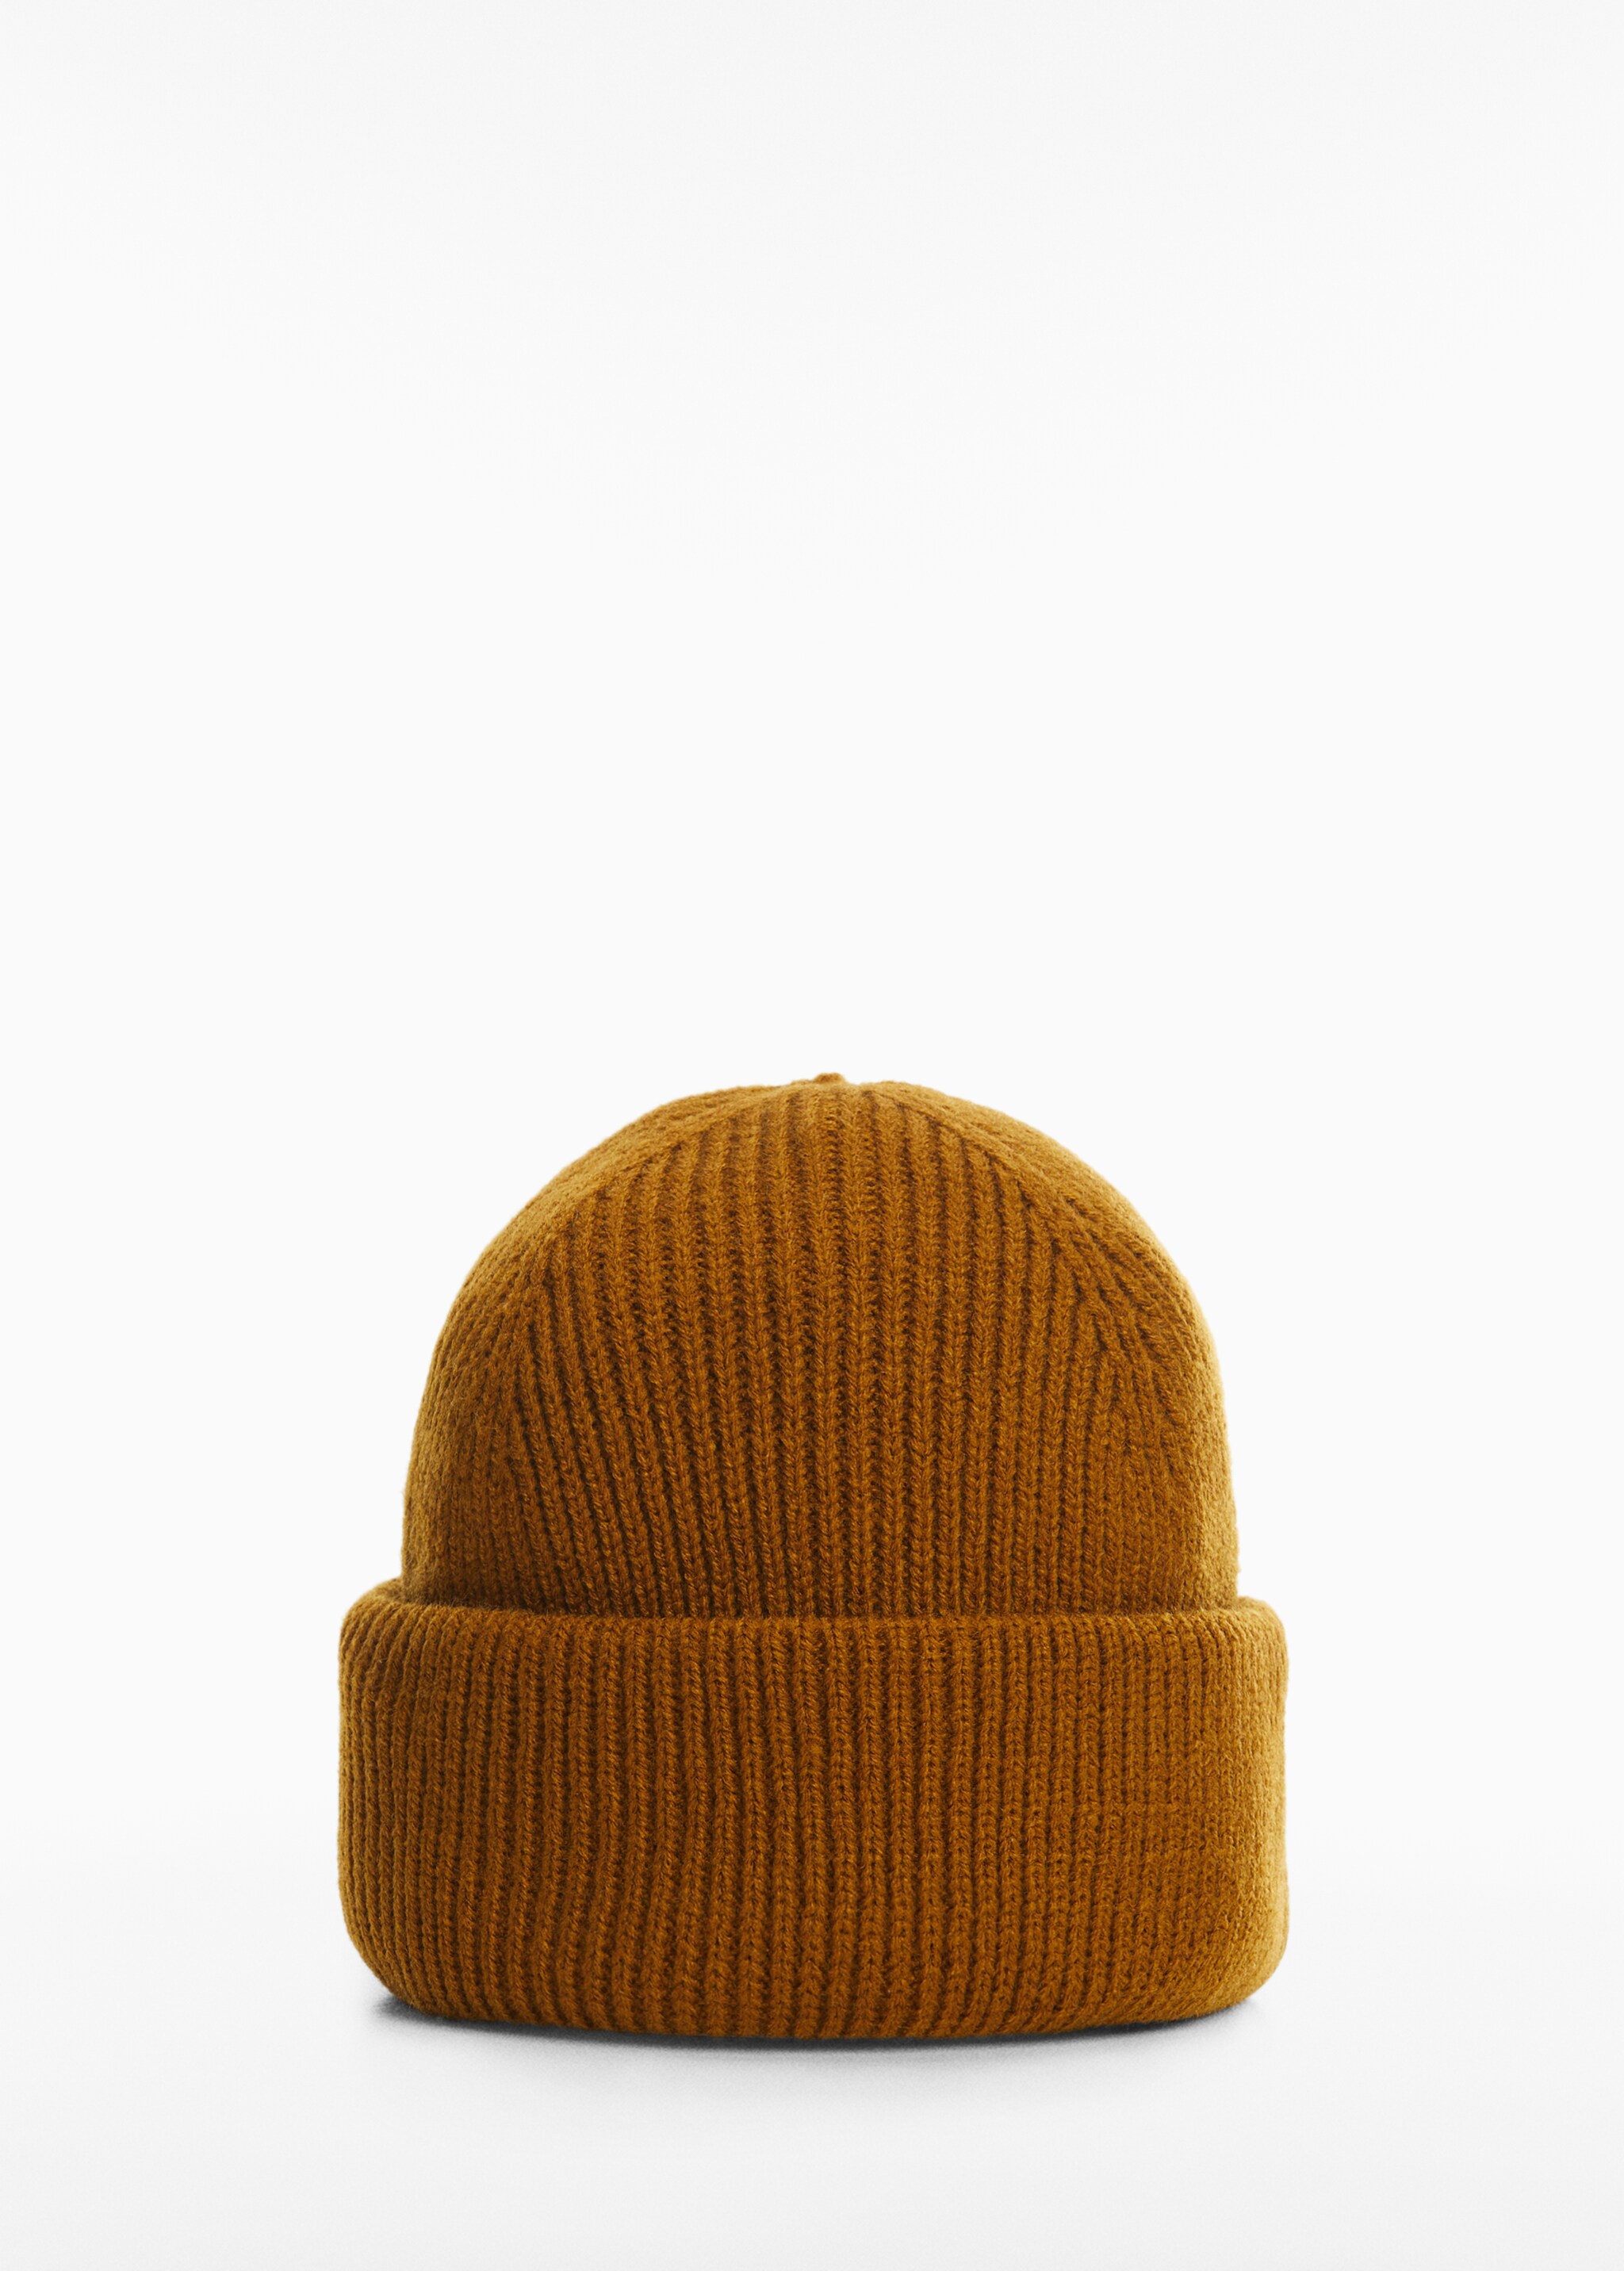 Short knitted hat - Article without model